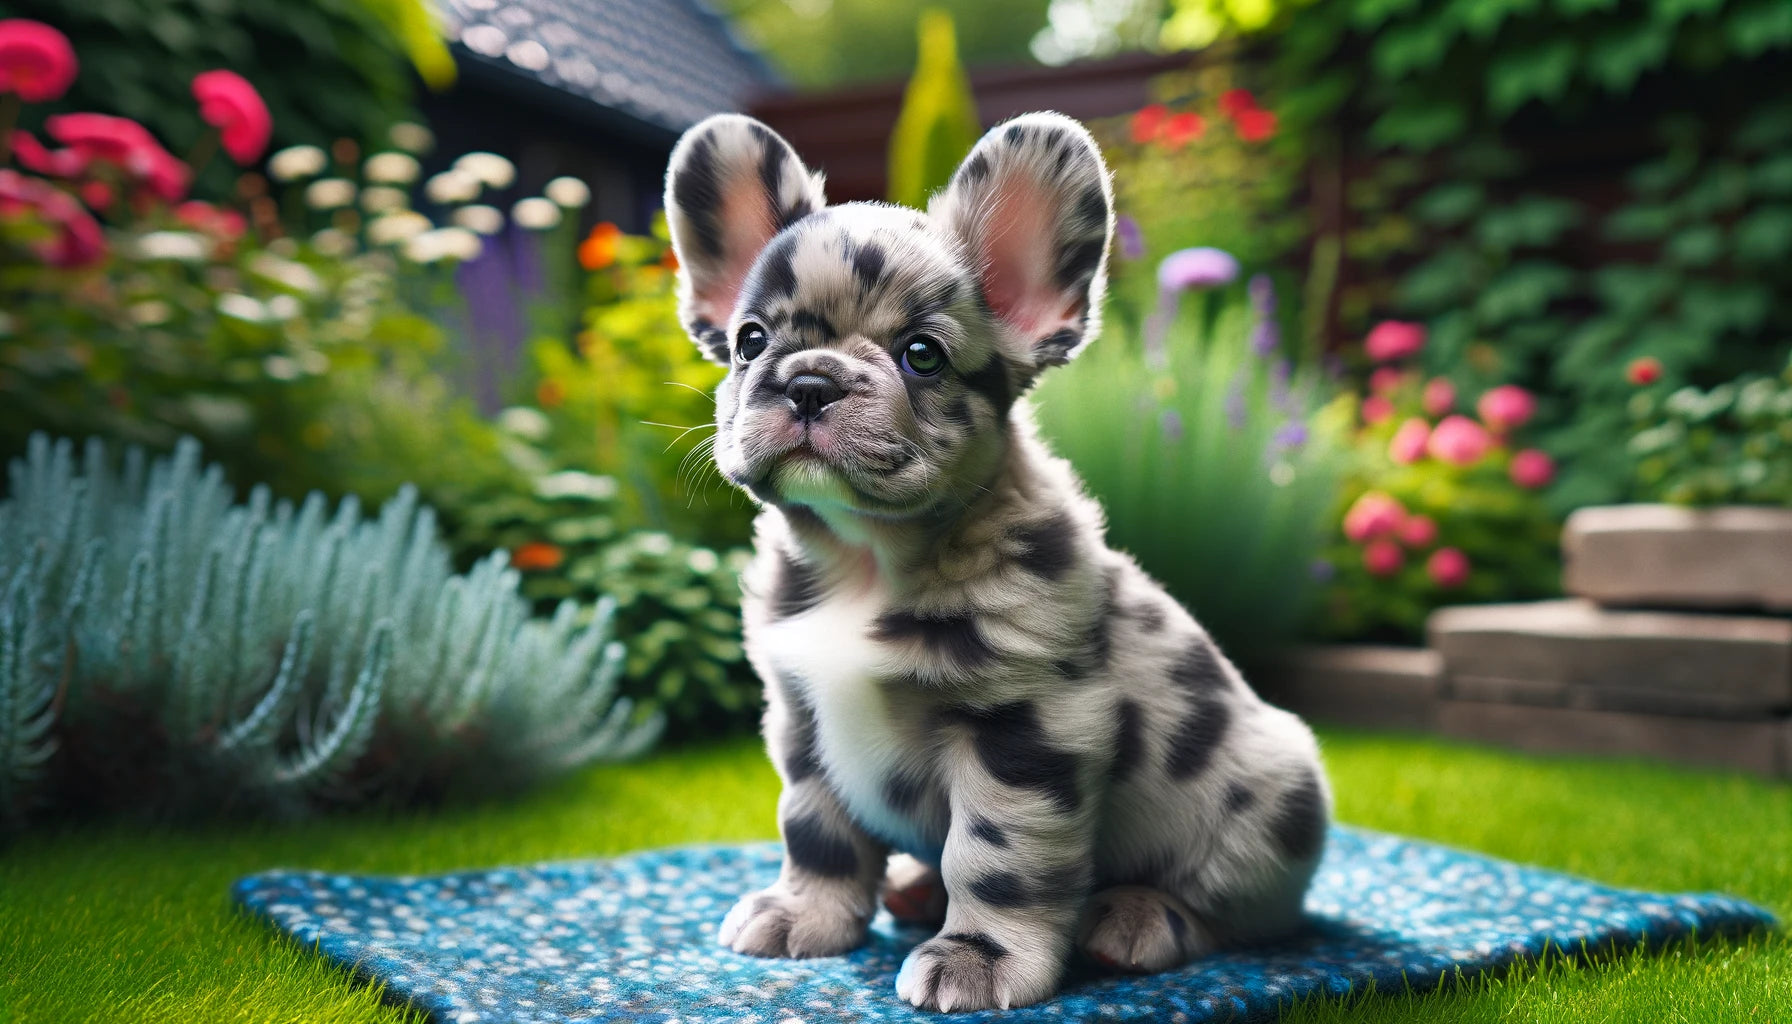 Fluffy Frenchies: Allure or Allure and Chore?